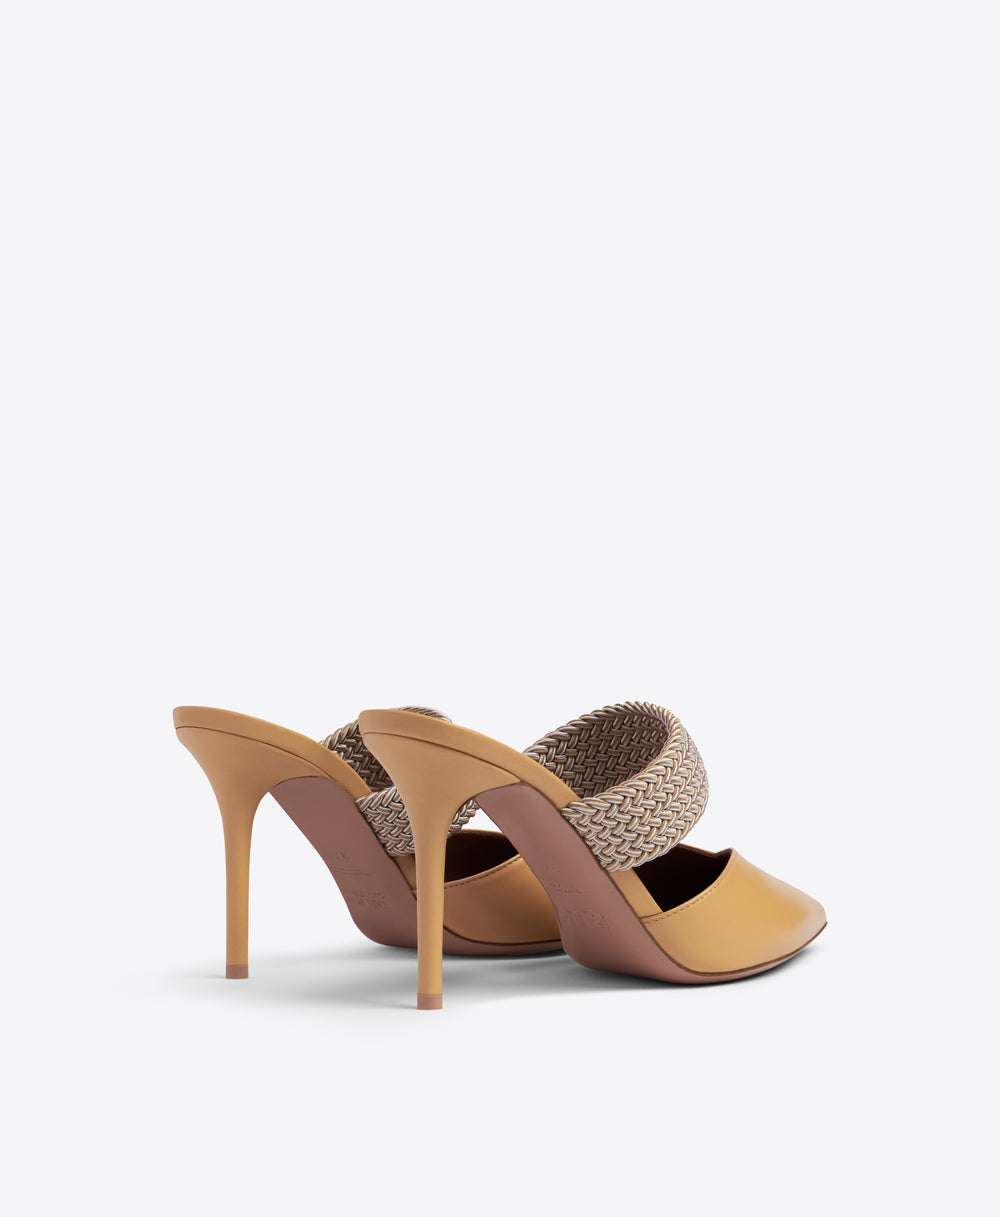 Malone Souliers Maisie 85mm Sepia Leather Heeled Mules